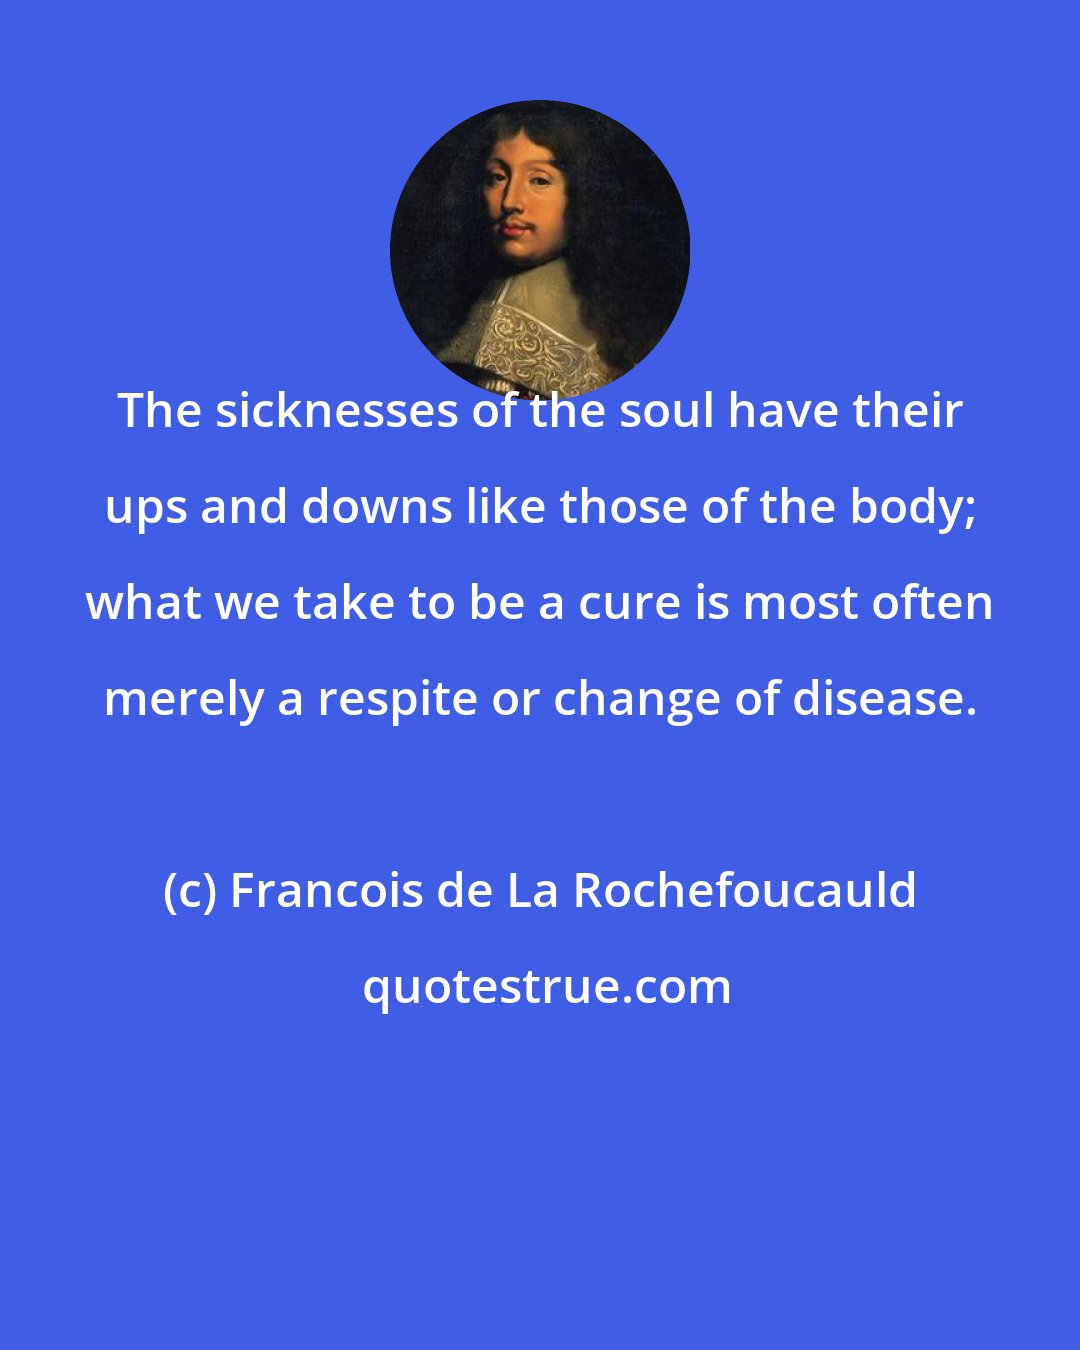 Francois de La Rochefoucauld: The sicknesses of the soul have their ups and downs like those of the body; what we take to be a cure is most often merely a respite or change of disease.